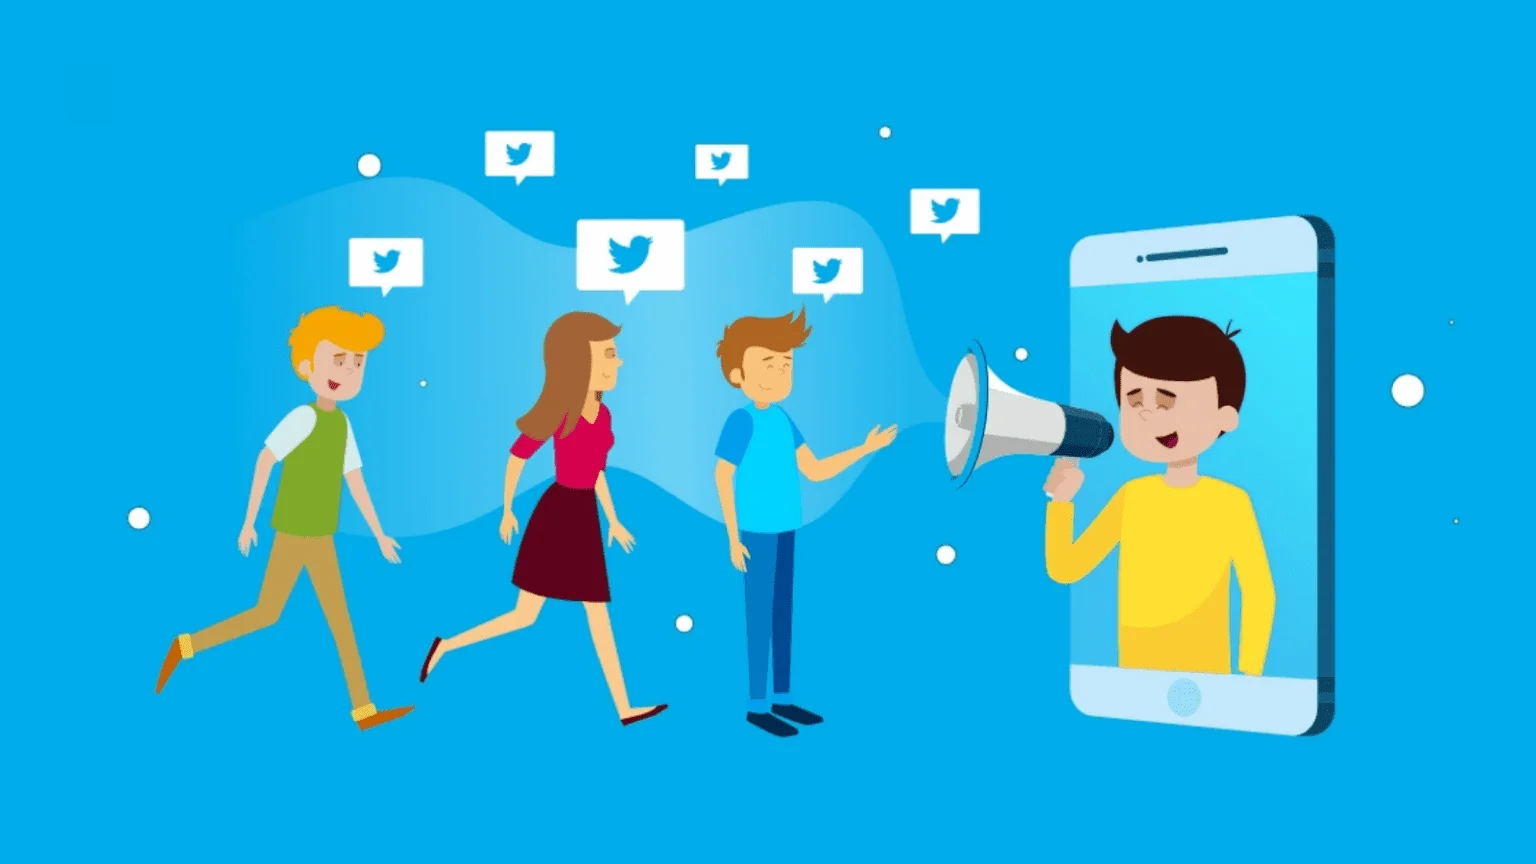 collaborate-with-influencers-to-get-more-followers-on-twitter